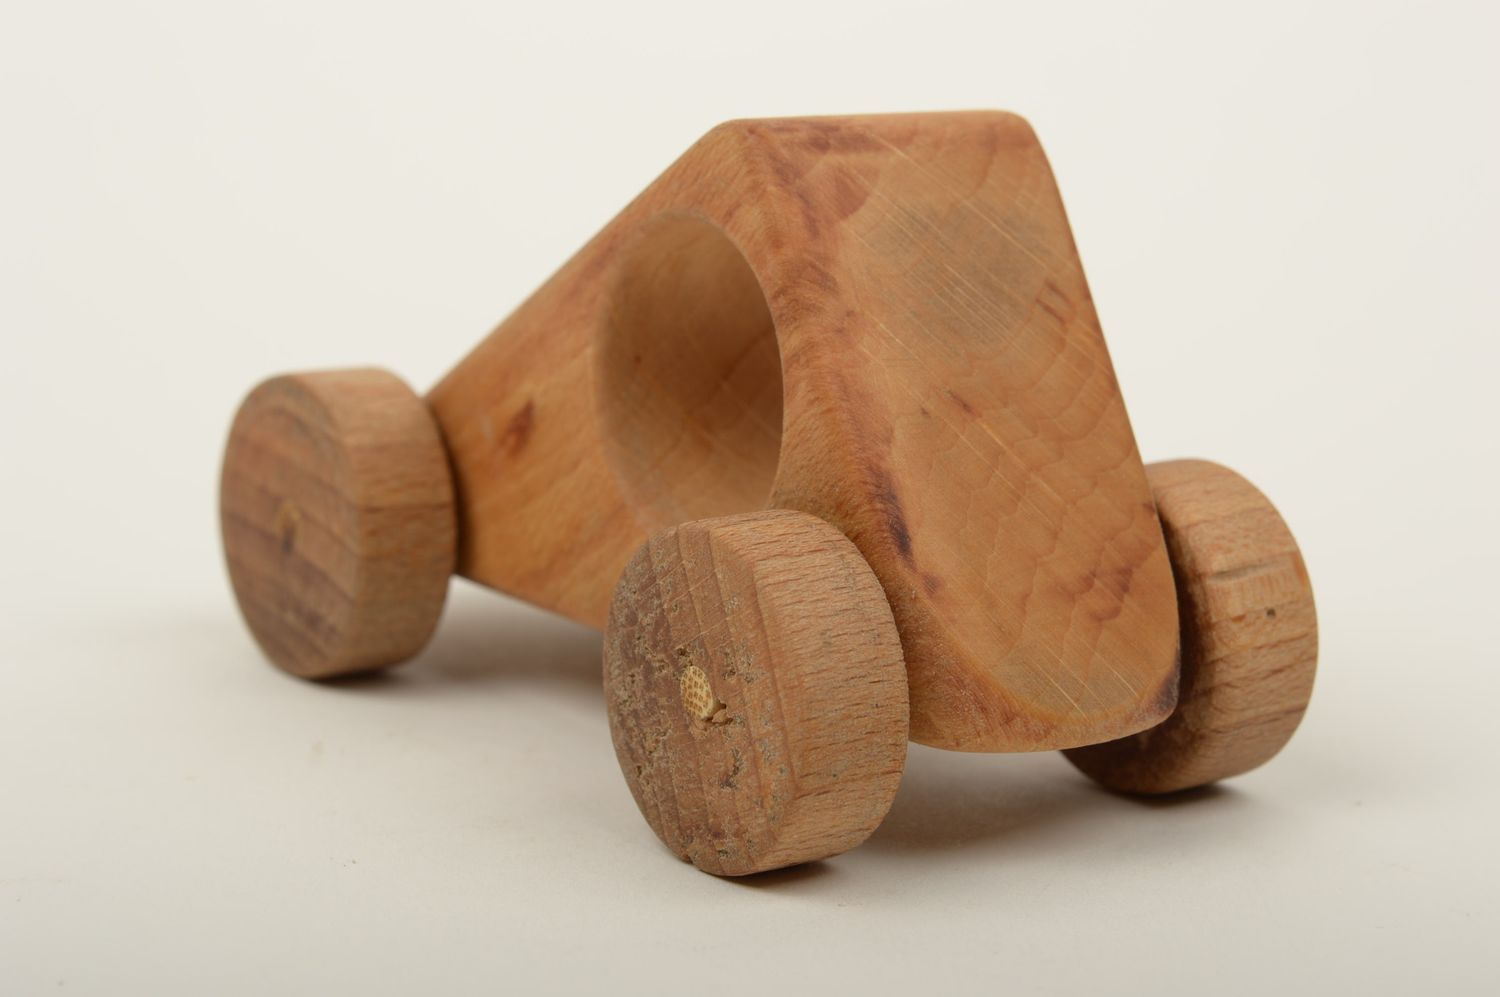 Handmade wooden toy wheeled toy for boys birthday gift ideas for kids photo 3